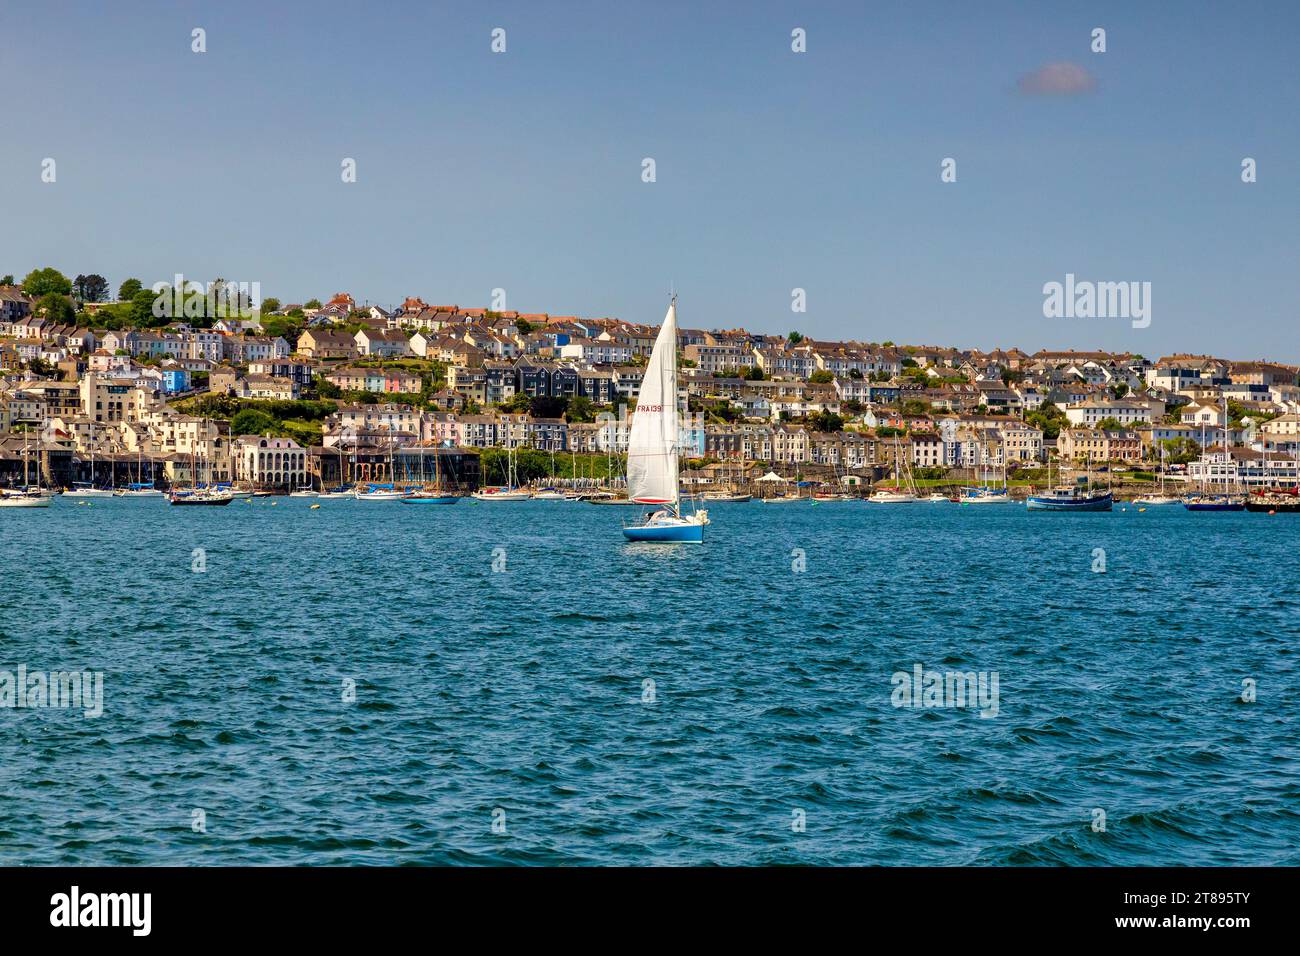 24 May 2023: Falmouth, Cornwall, UK - Multiple homes overlooking the water in Falmouth, Cornwall, UK. Sailing boat on the water. Stock Photo